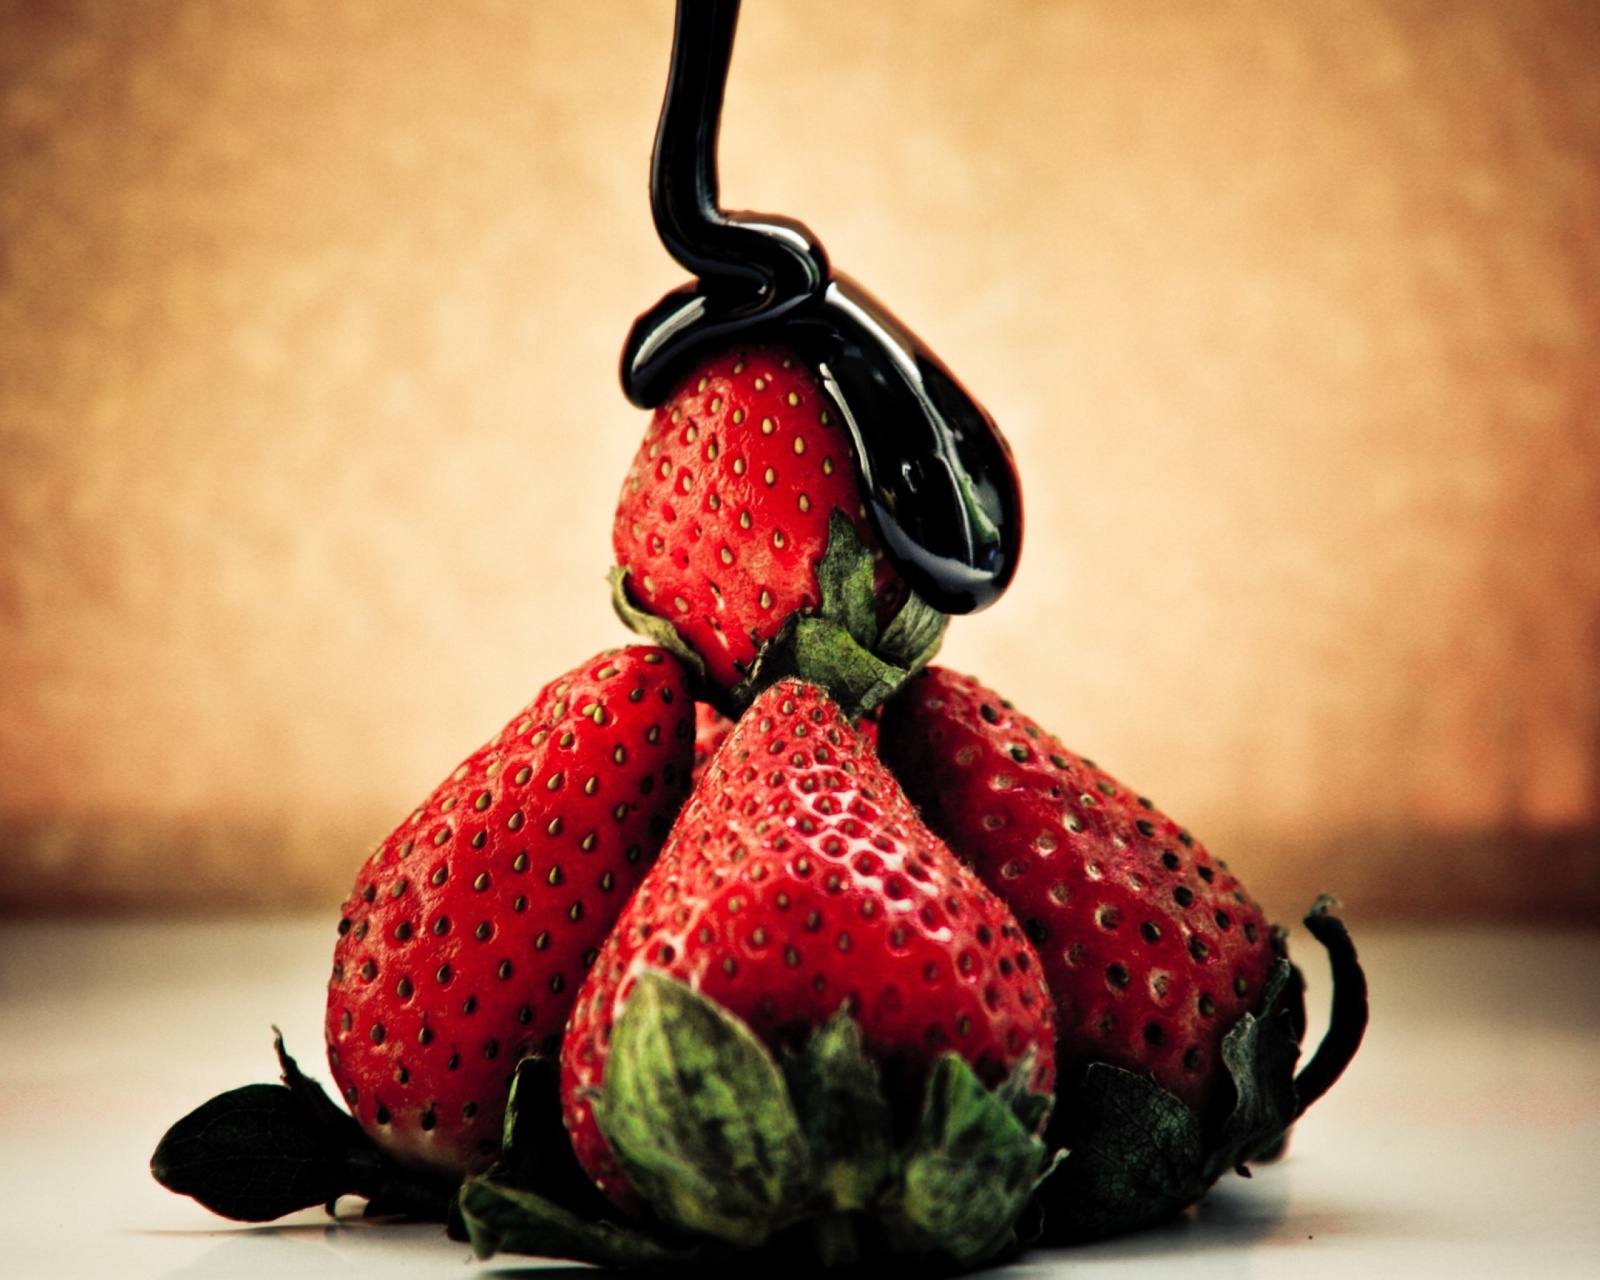 Strawberries with chocolate wallpaper 1600x1280